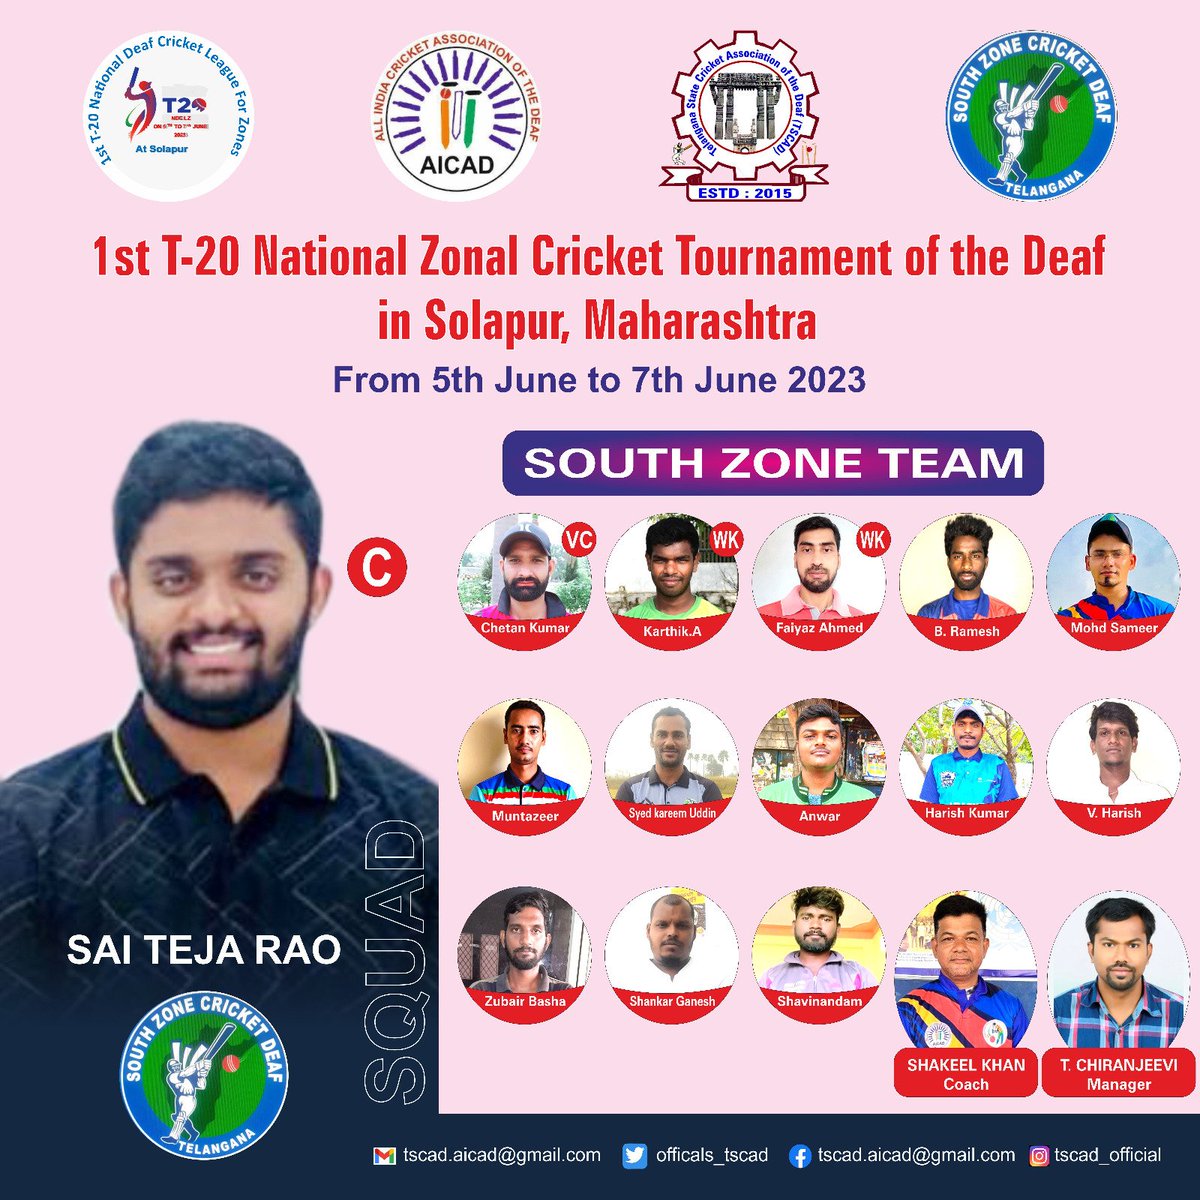 we, TSCAD are happy to inform you that 16 members from South Zone Team will be participating in 1st T-20 National Zonal Cricket Tournament of the Deaf in Solapur, Maharashtra from 5th June to 7th June 2023.